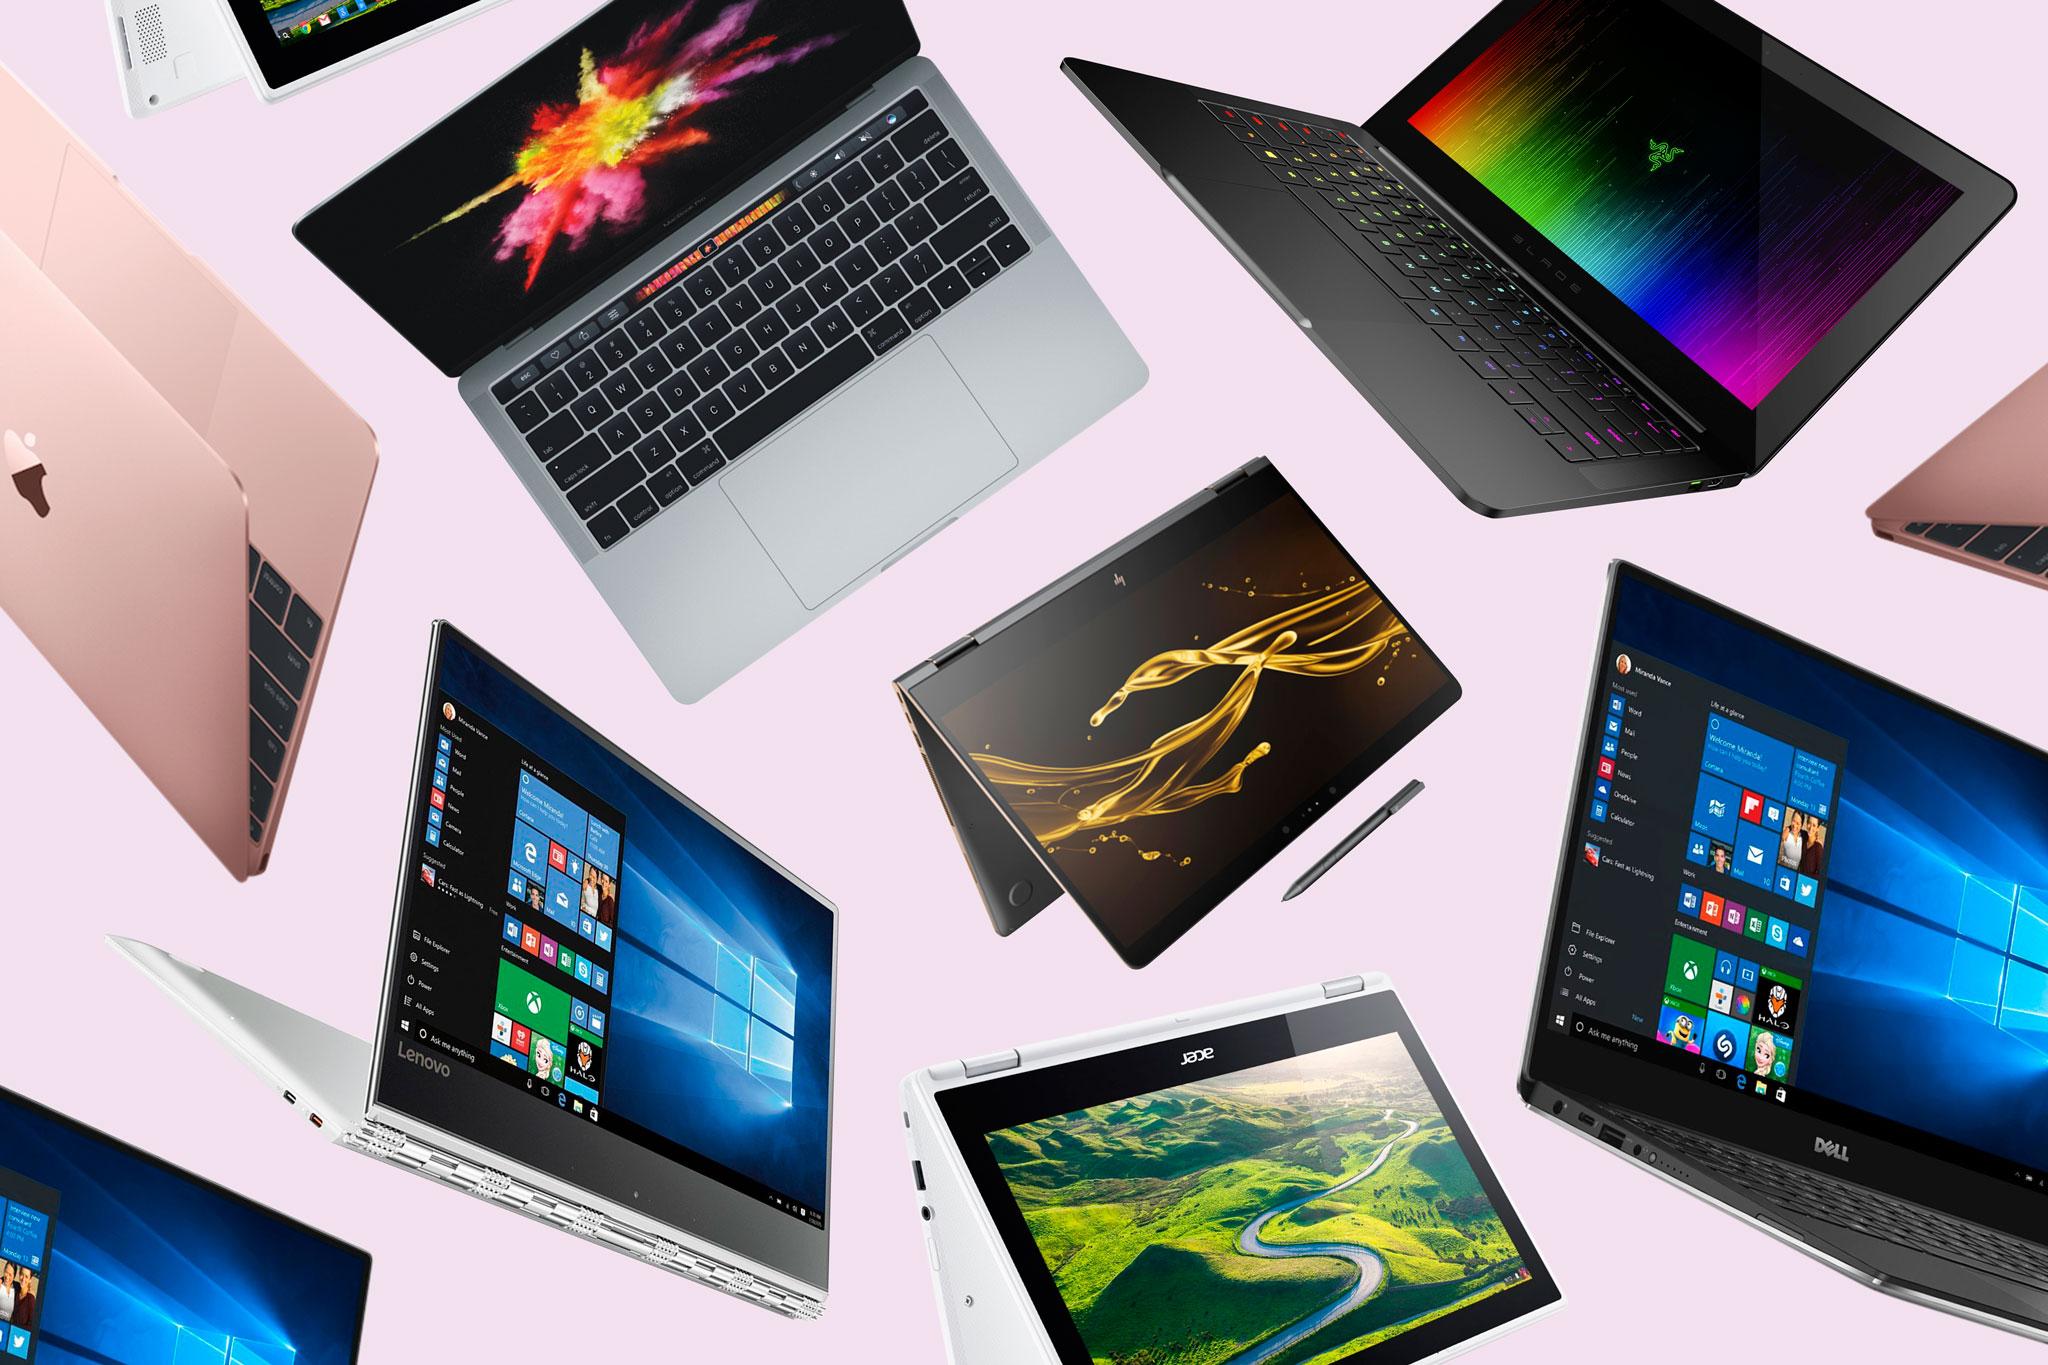 How good are Lenovo Laptops compared with other well known brands